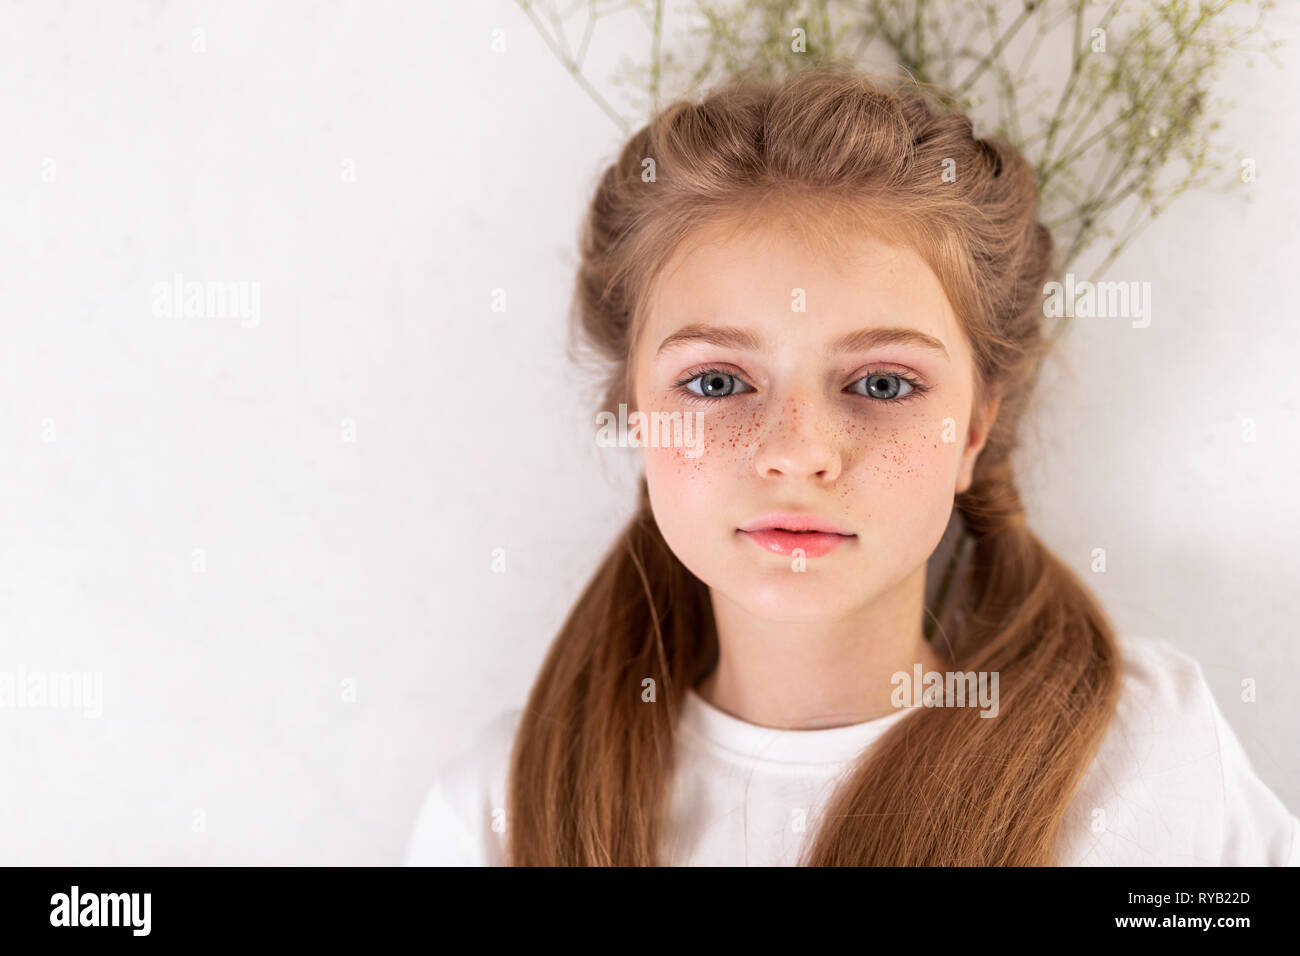 Pretty little girl with cute face lying on floor with flowers Stock Photo